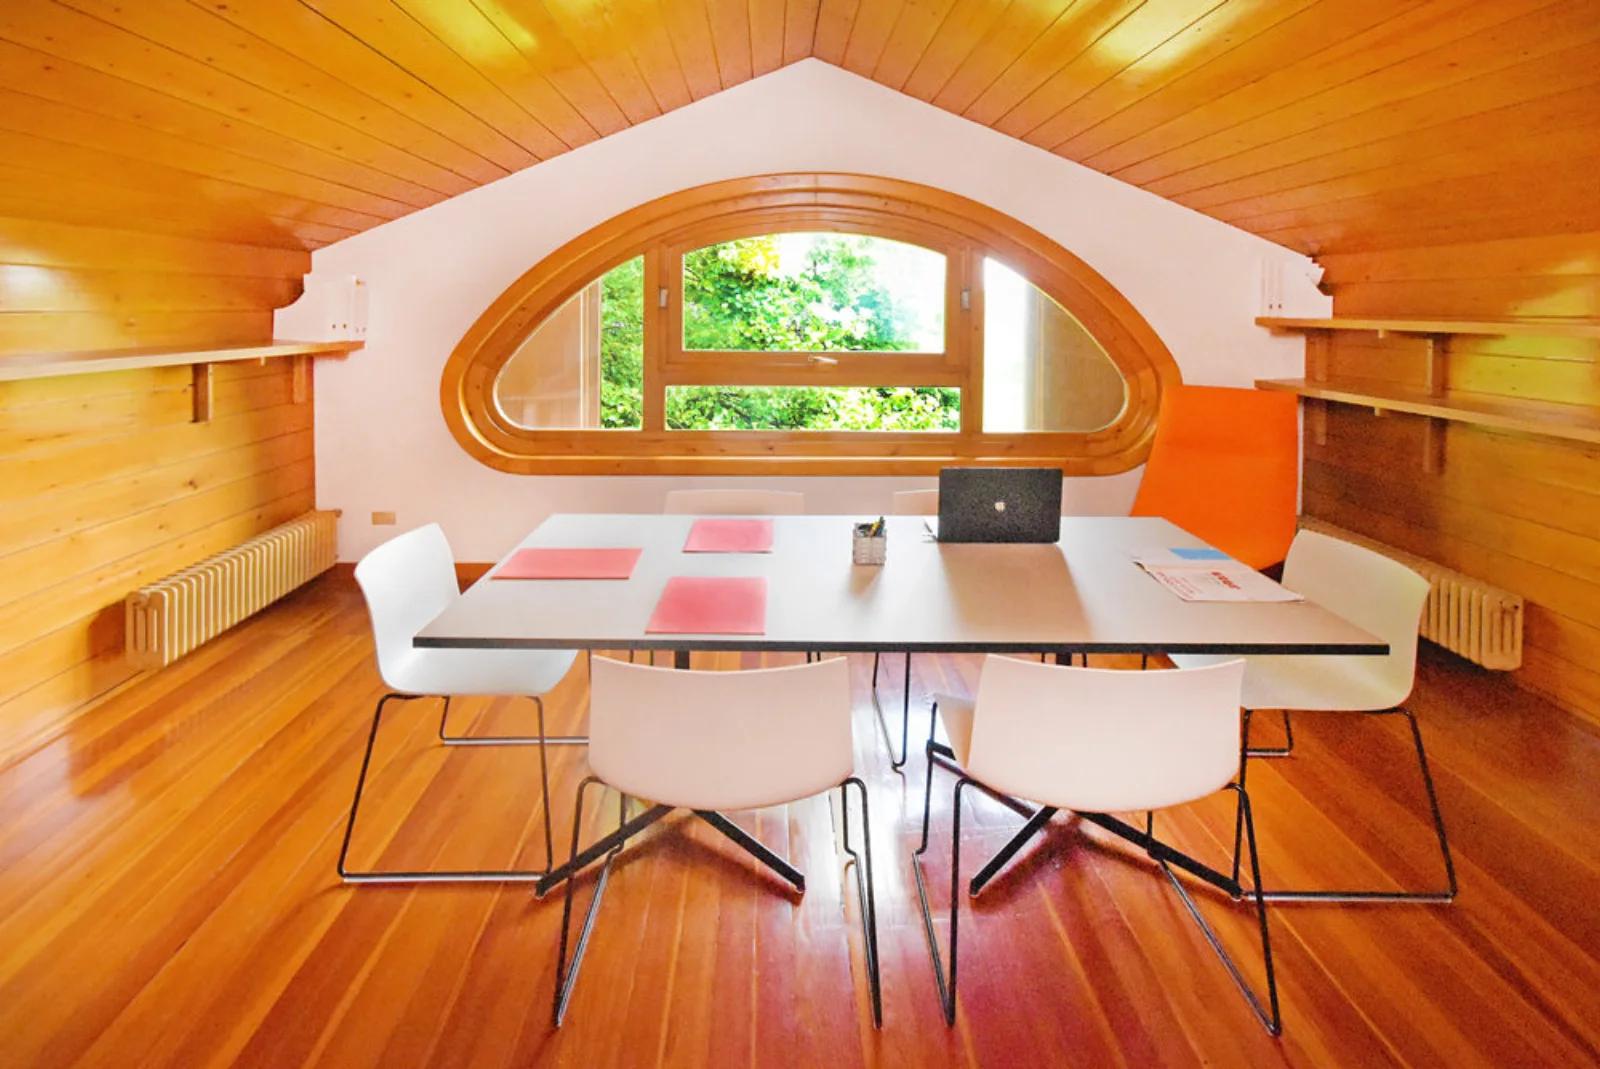 Meeting room in Modern, organic architect-designed house - 1